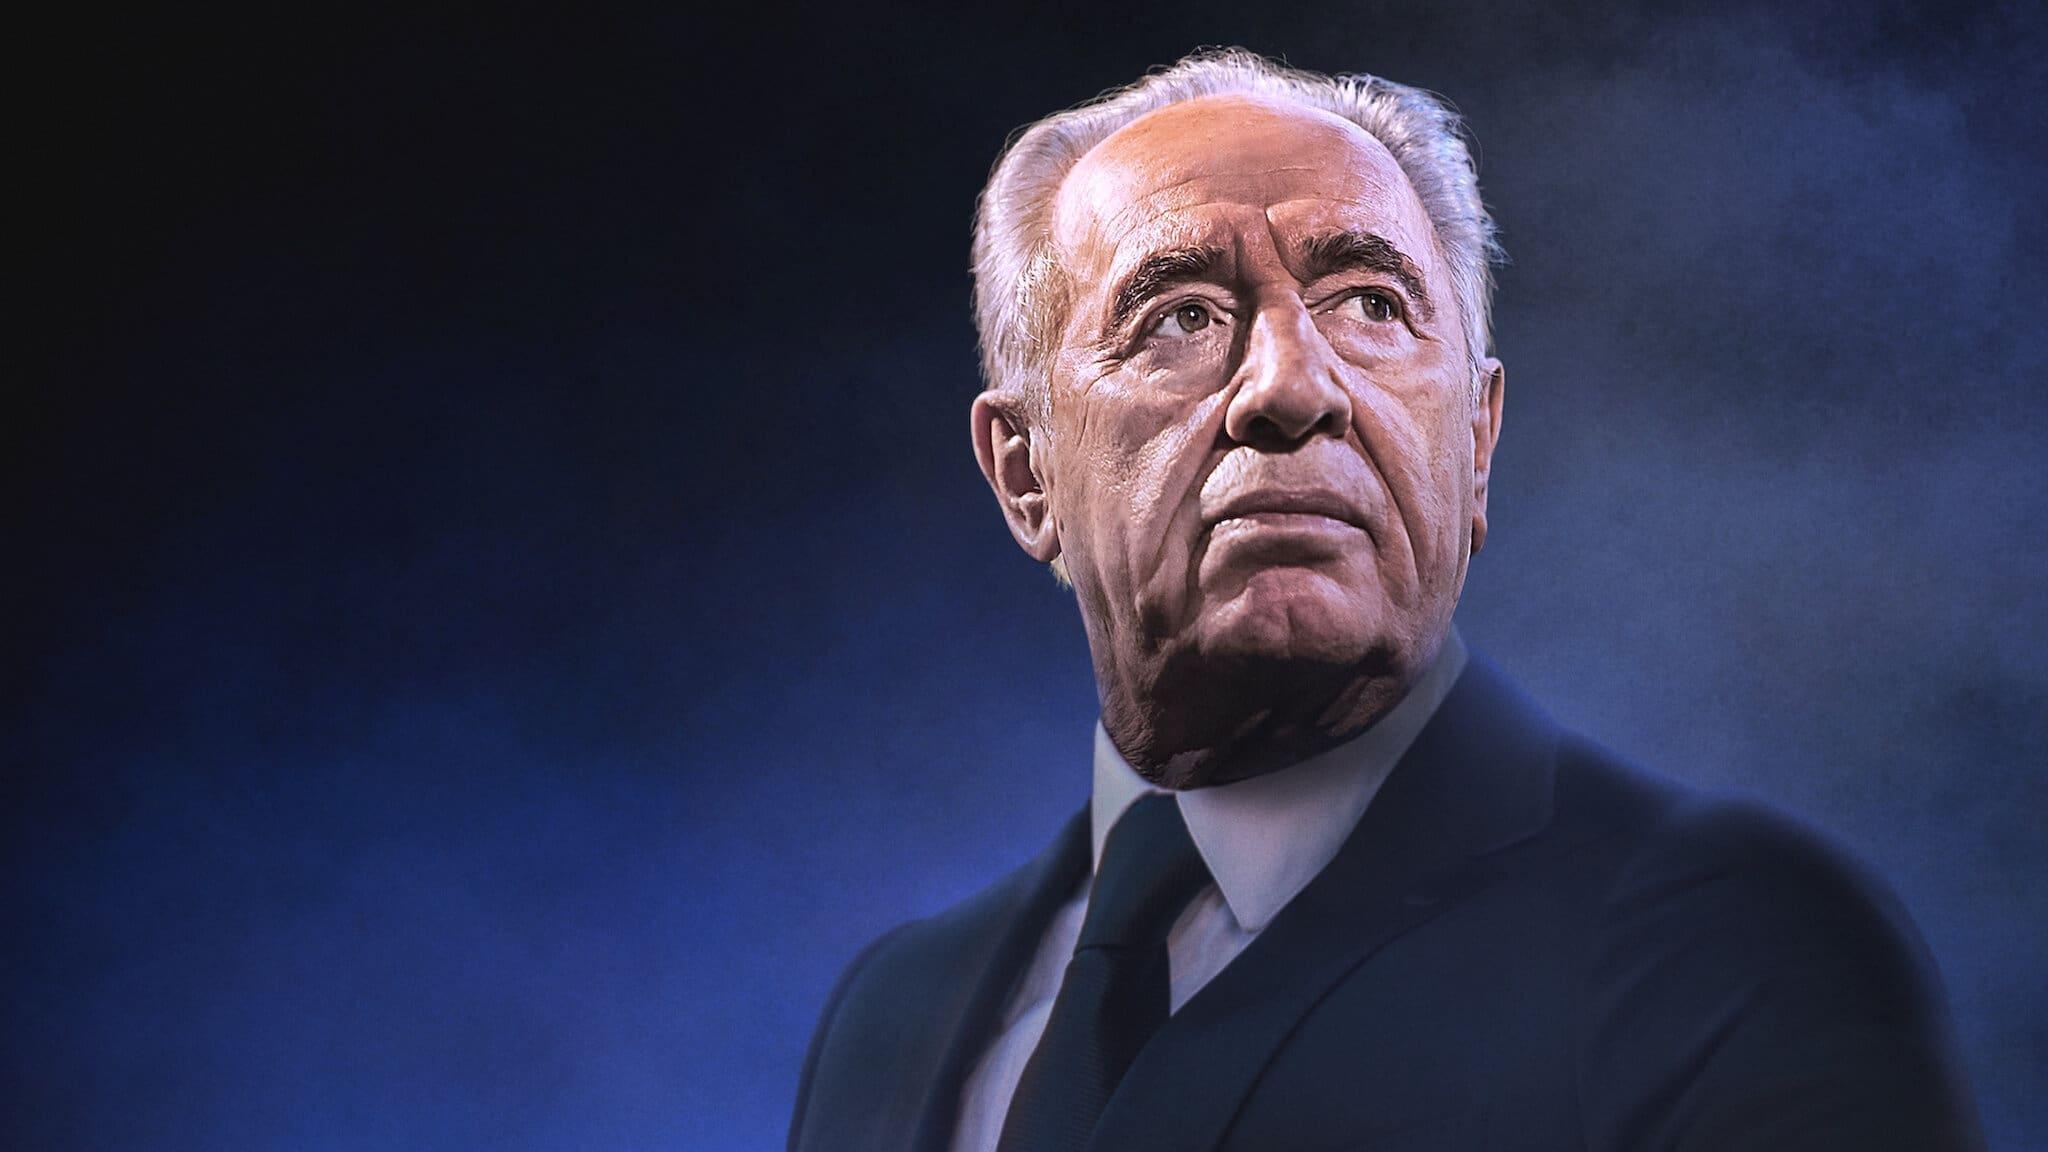 Never Stop Dreaming: The Life and Legacy of Shimon Peres backdrop